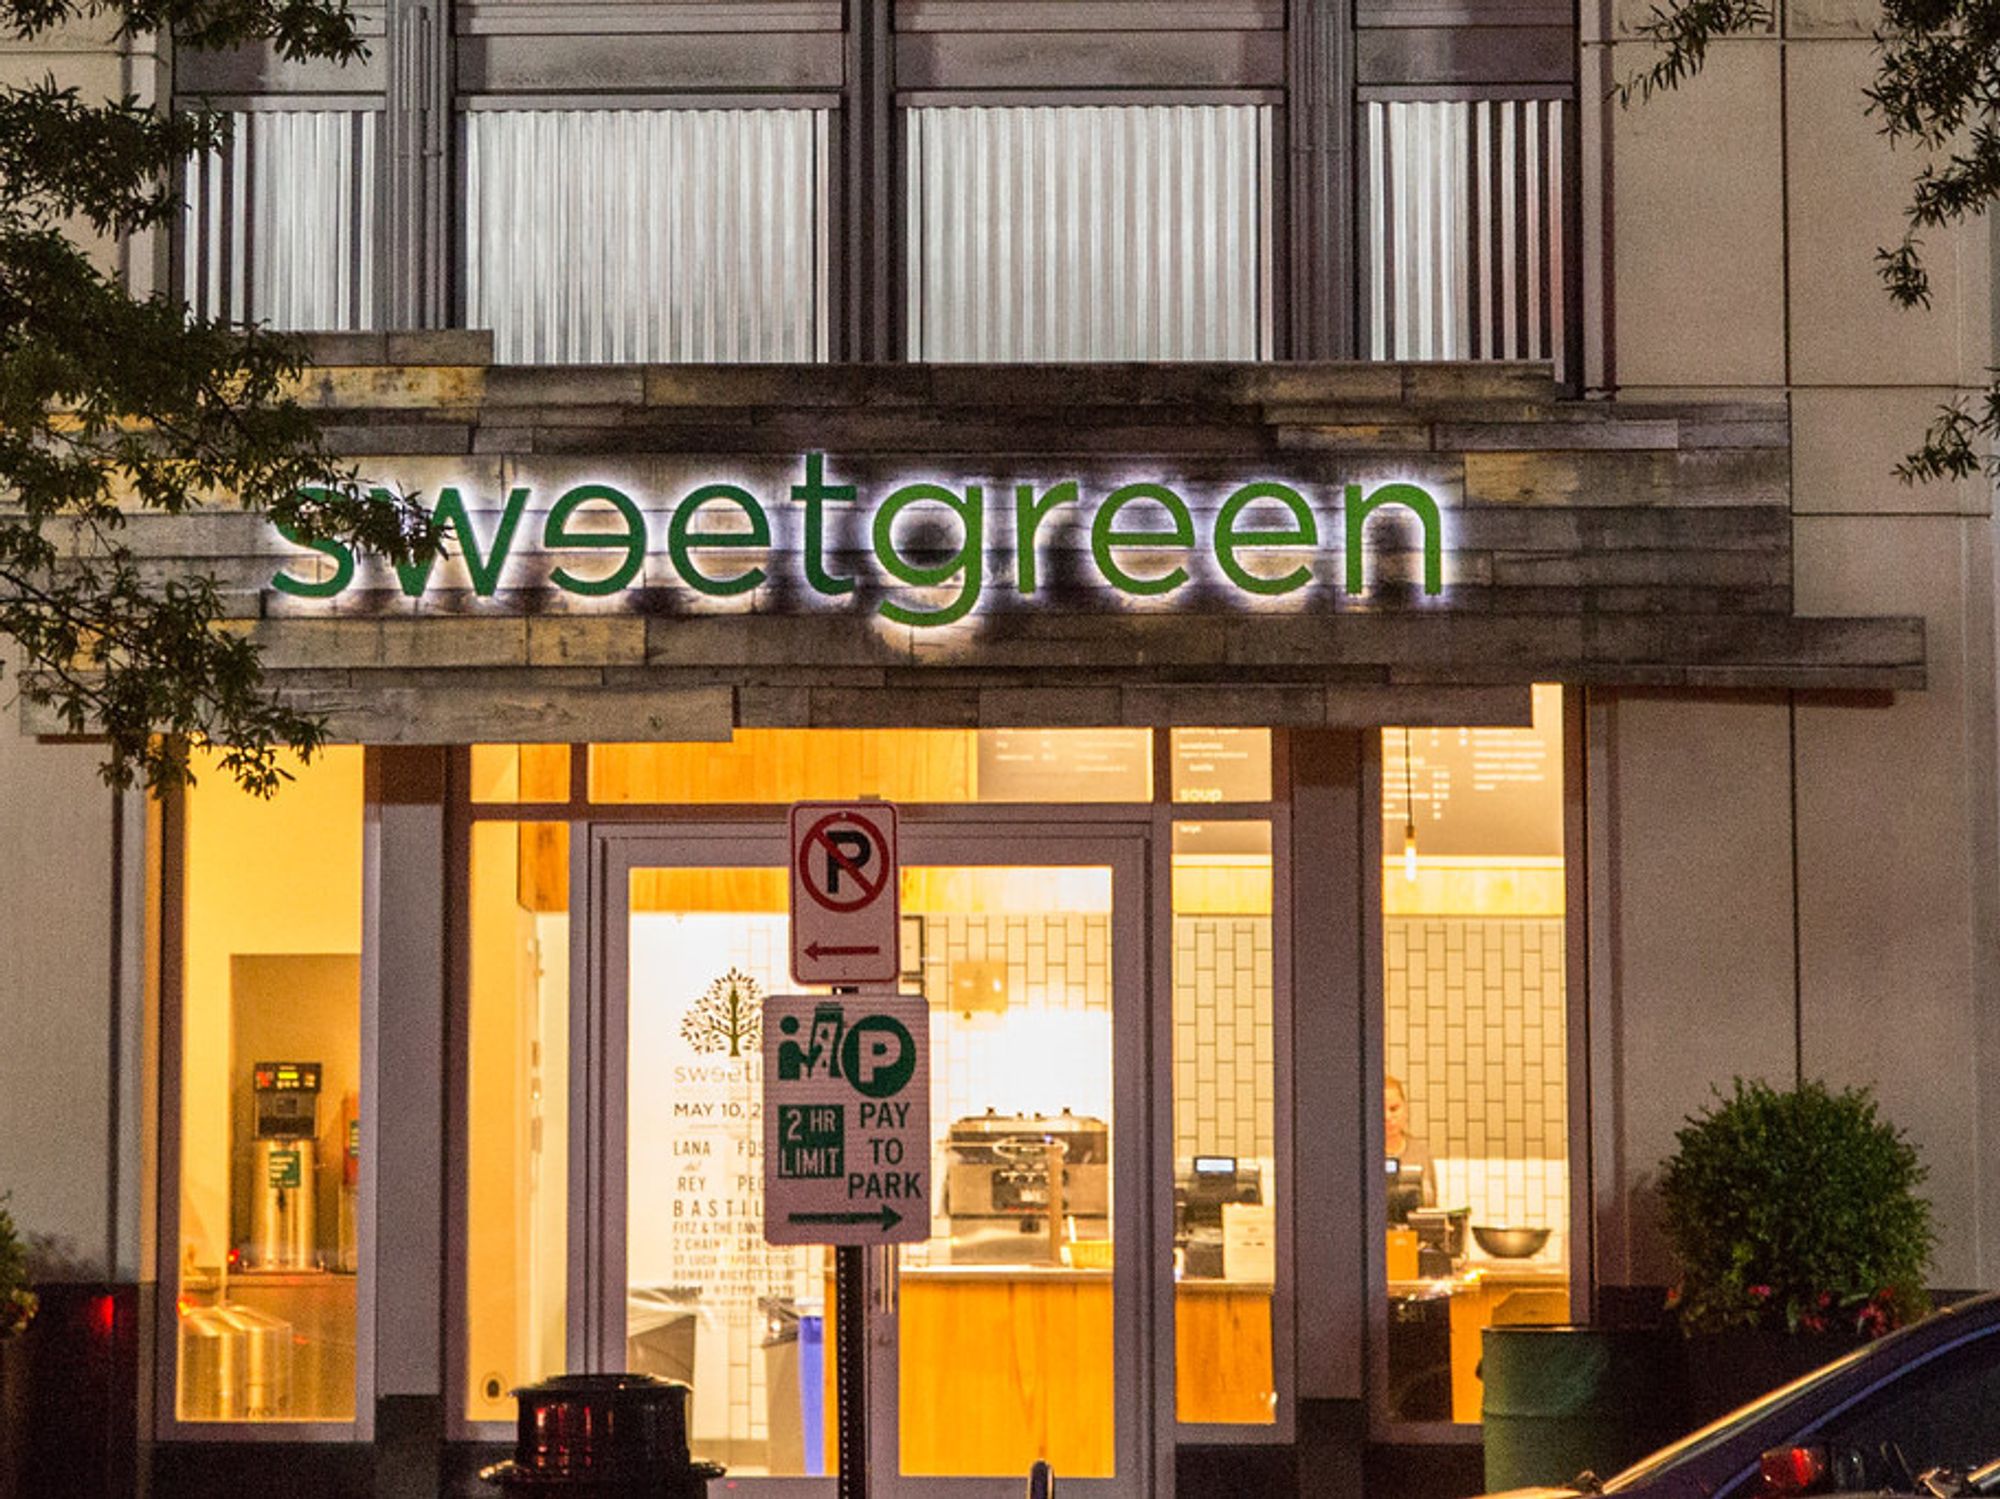 Facing Plunging Revenue, Sweetgreen Lays Off 10% of Staff At Its L.A. Headquarters (Exclusive)